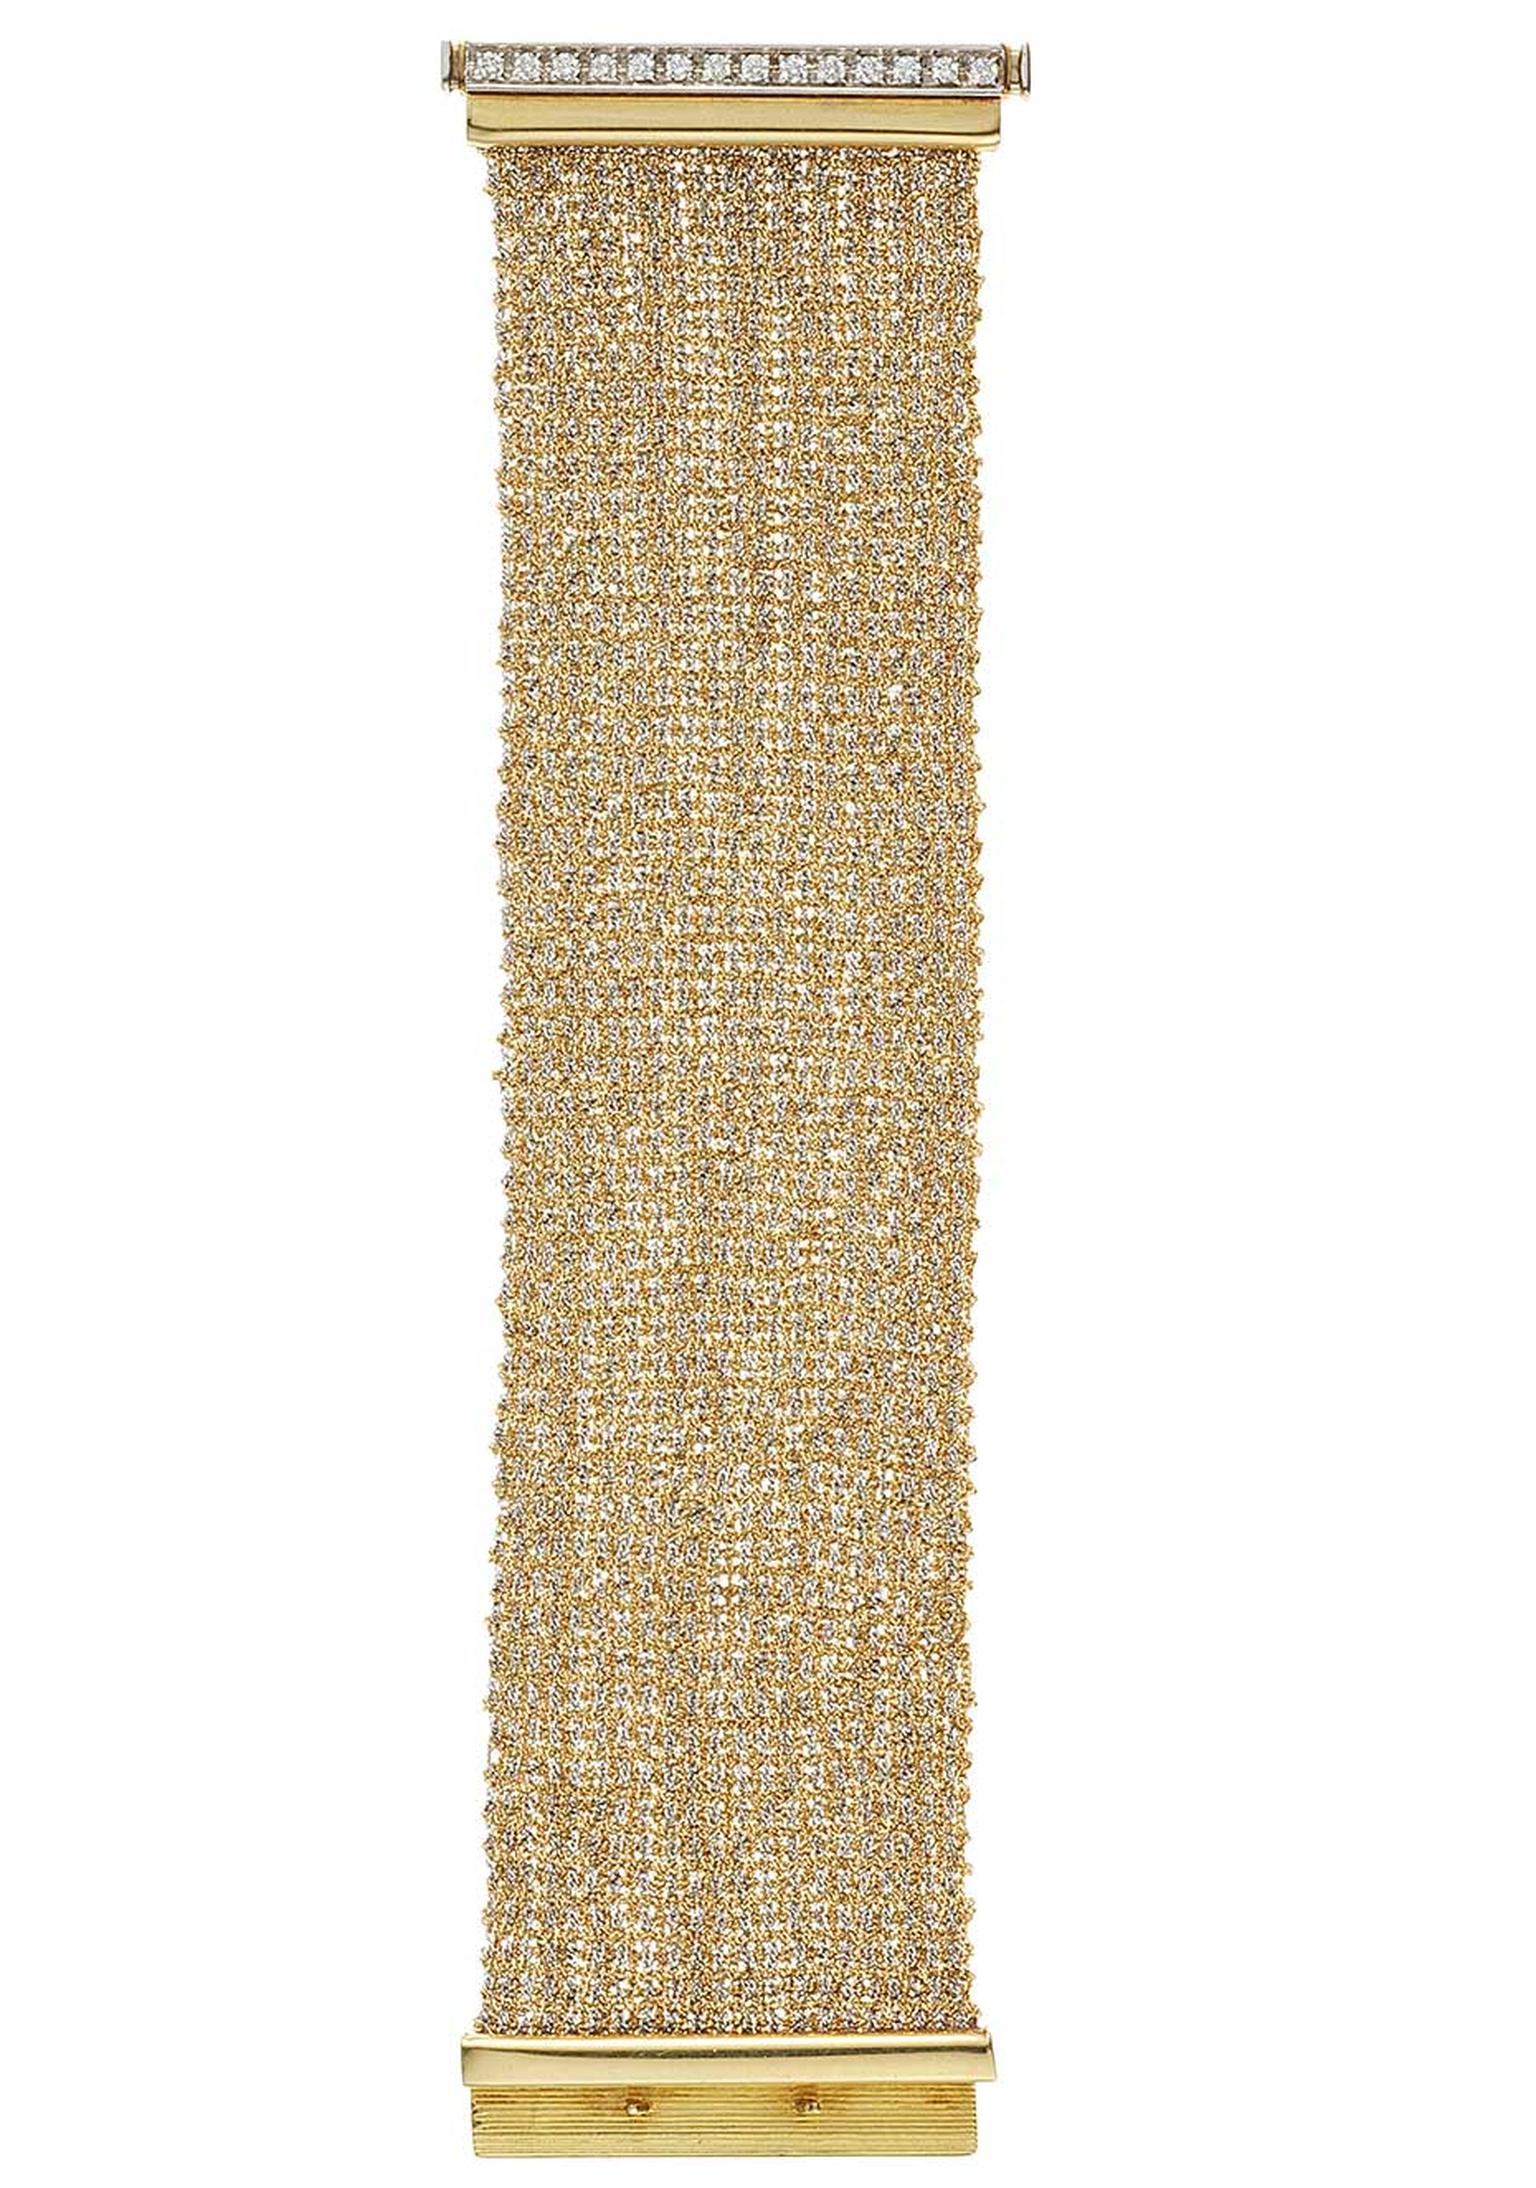 The woven gold Carolina Bucci bracelet was created using centuries-old weaving looms, resulting in incredibly supple woven gold, accentuated with diamonds (£8,815).